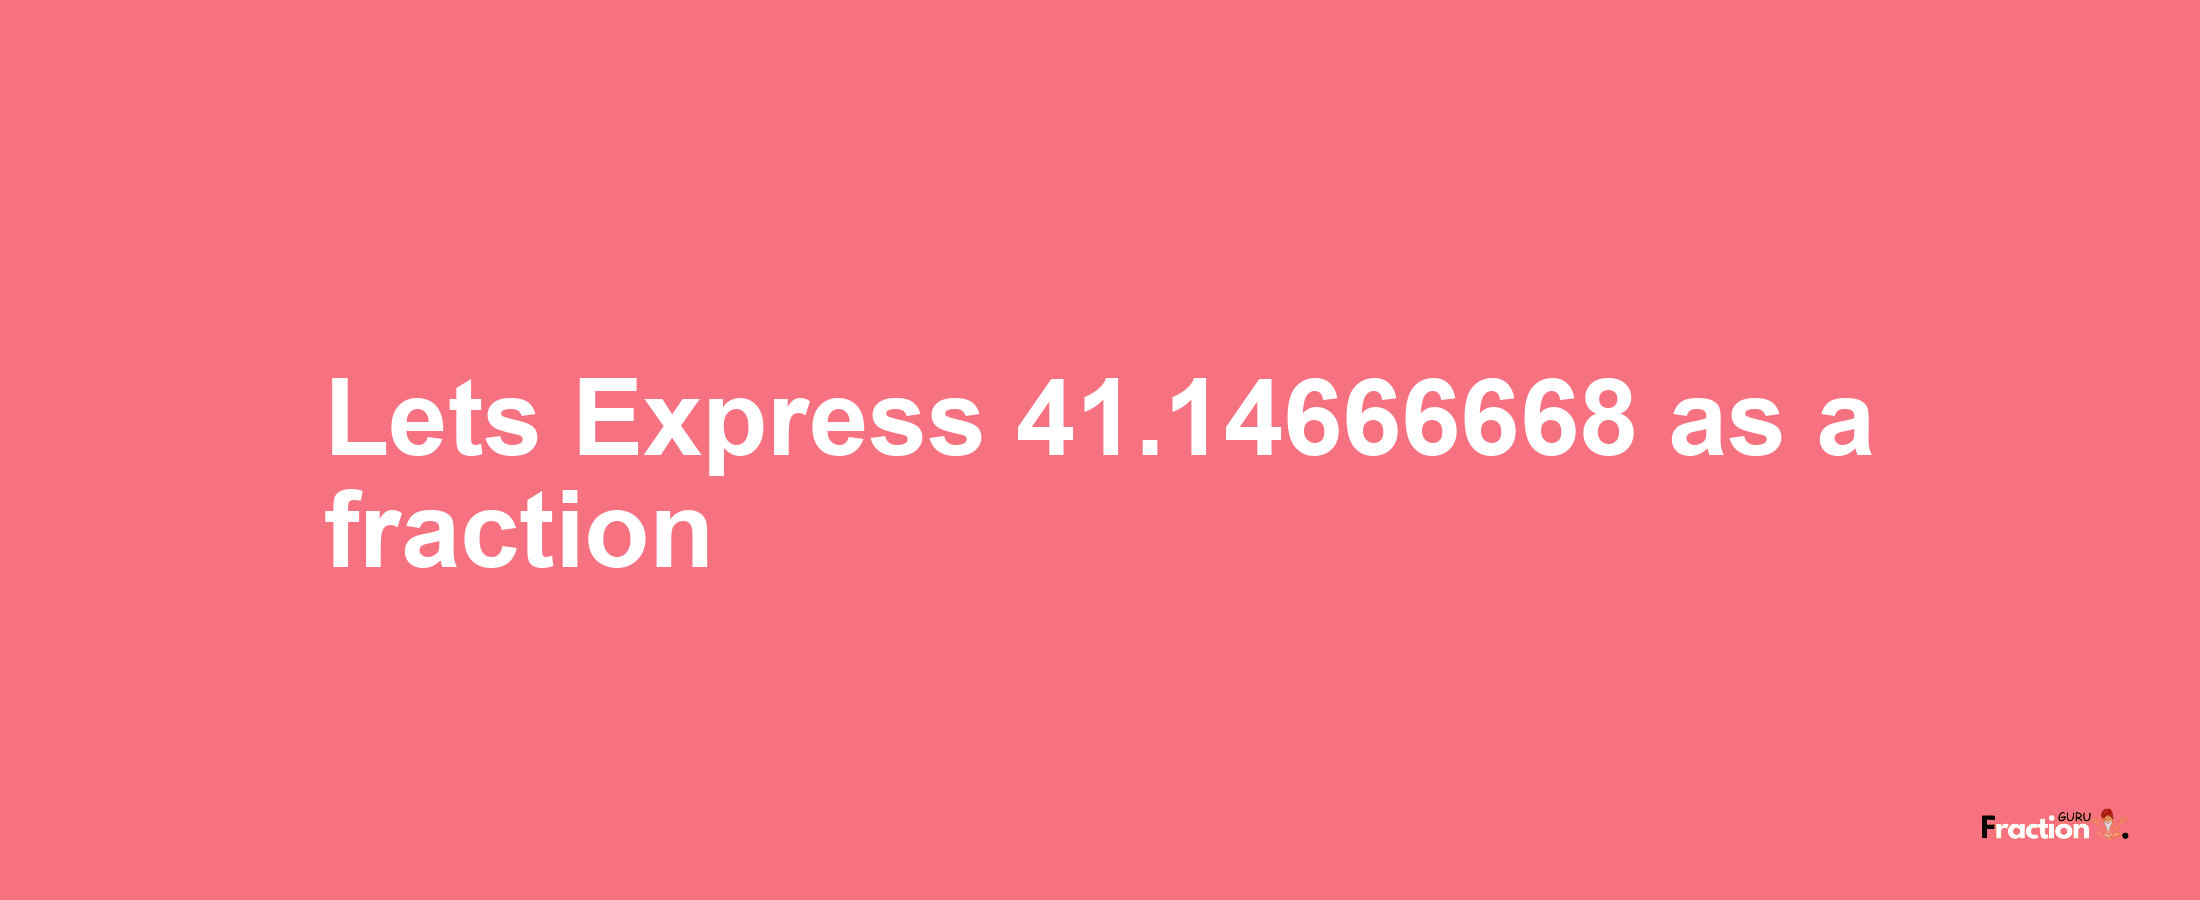 Lets Express 41.14666668 as afraction